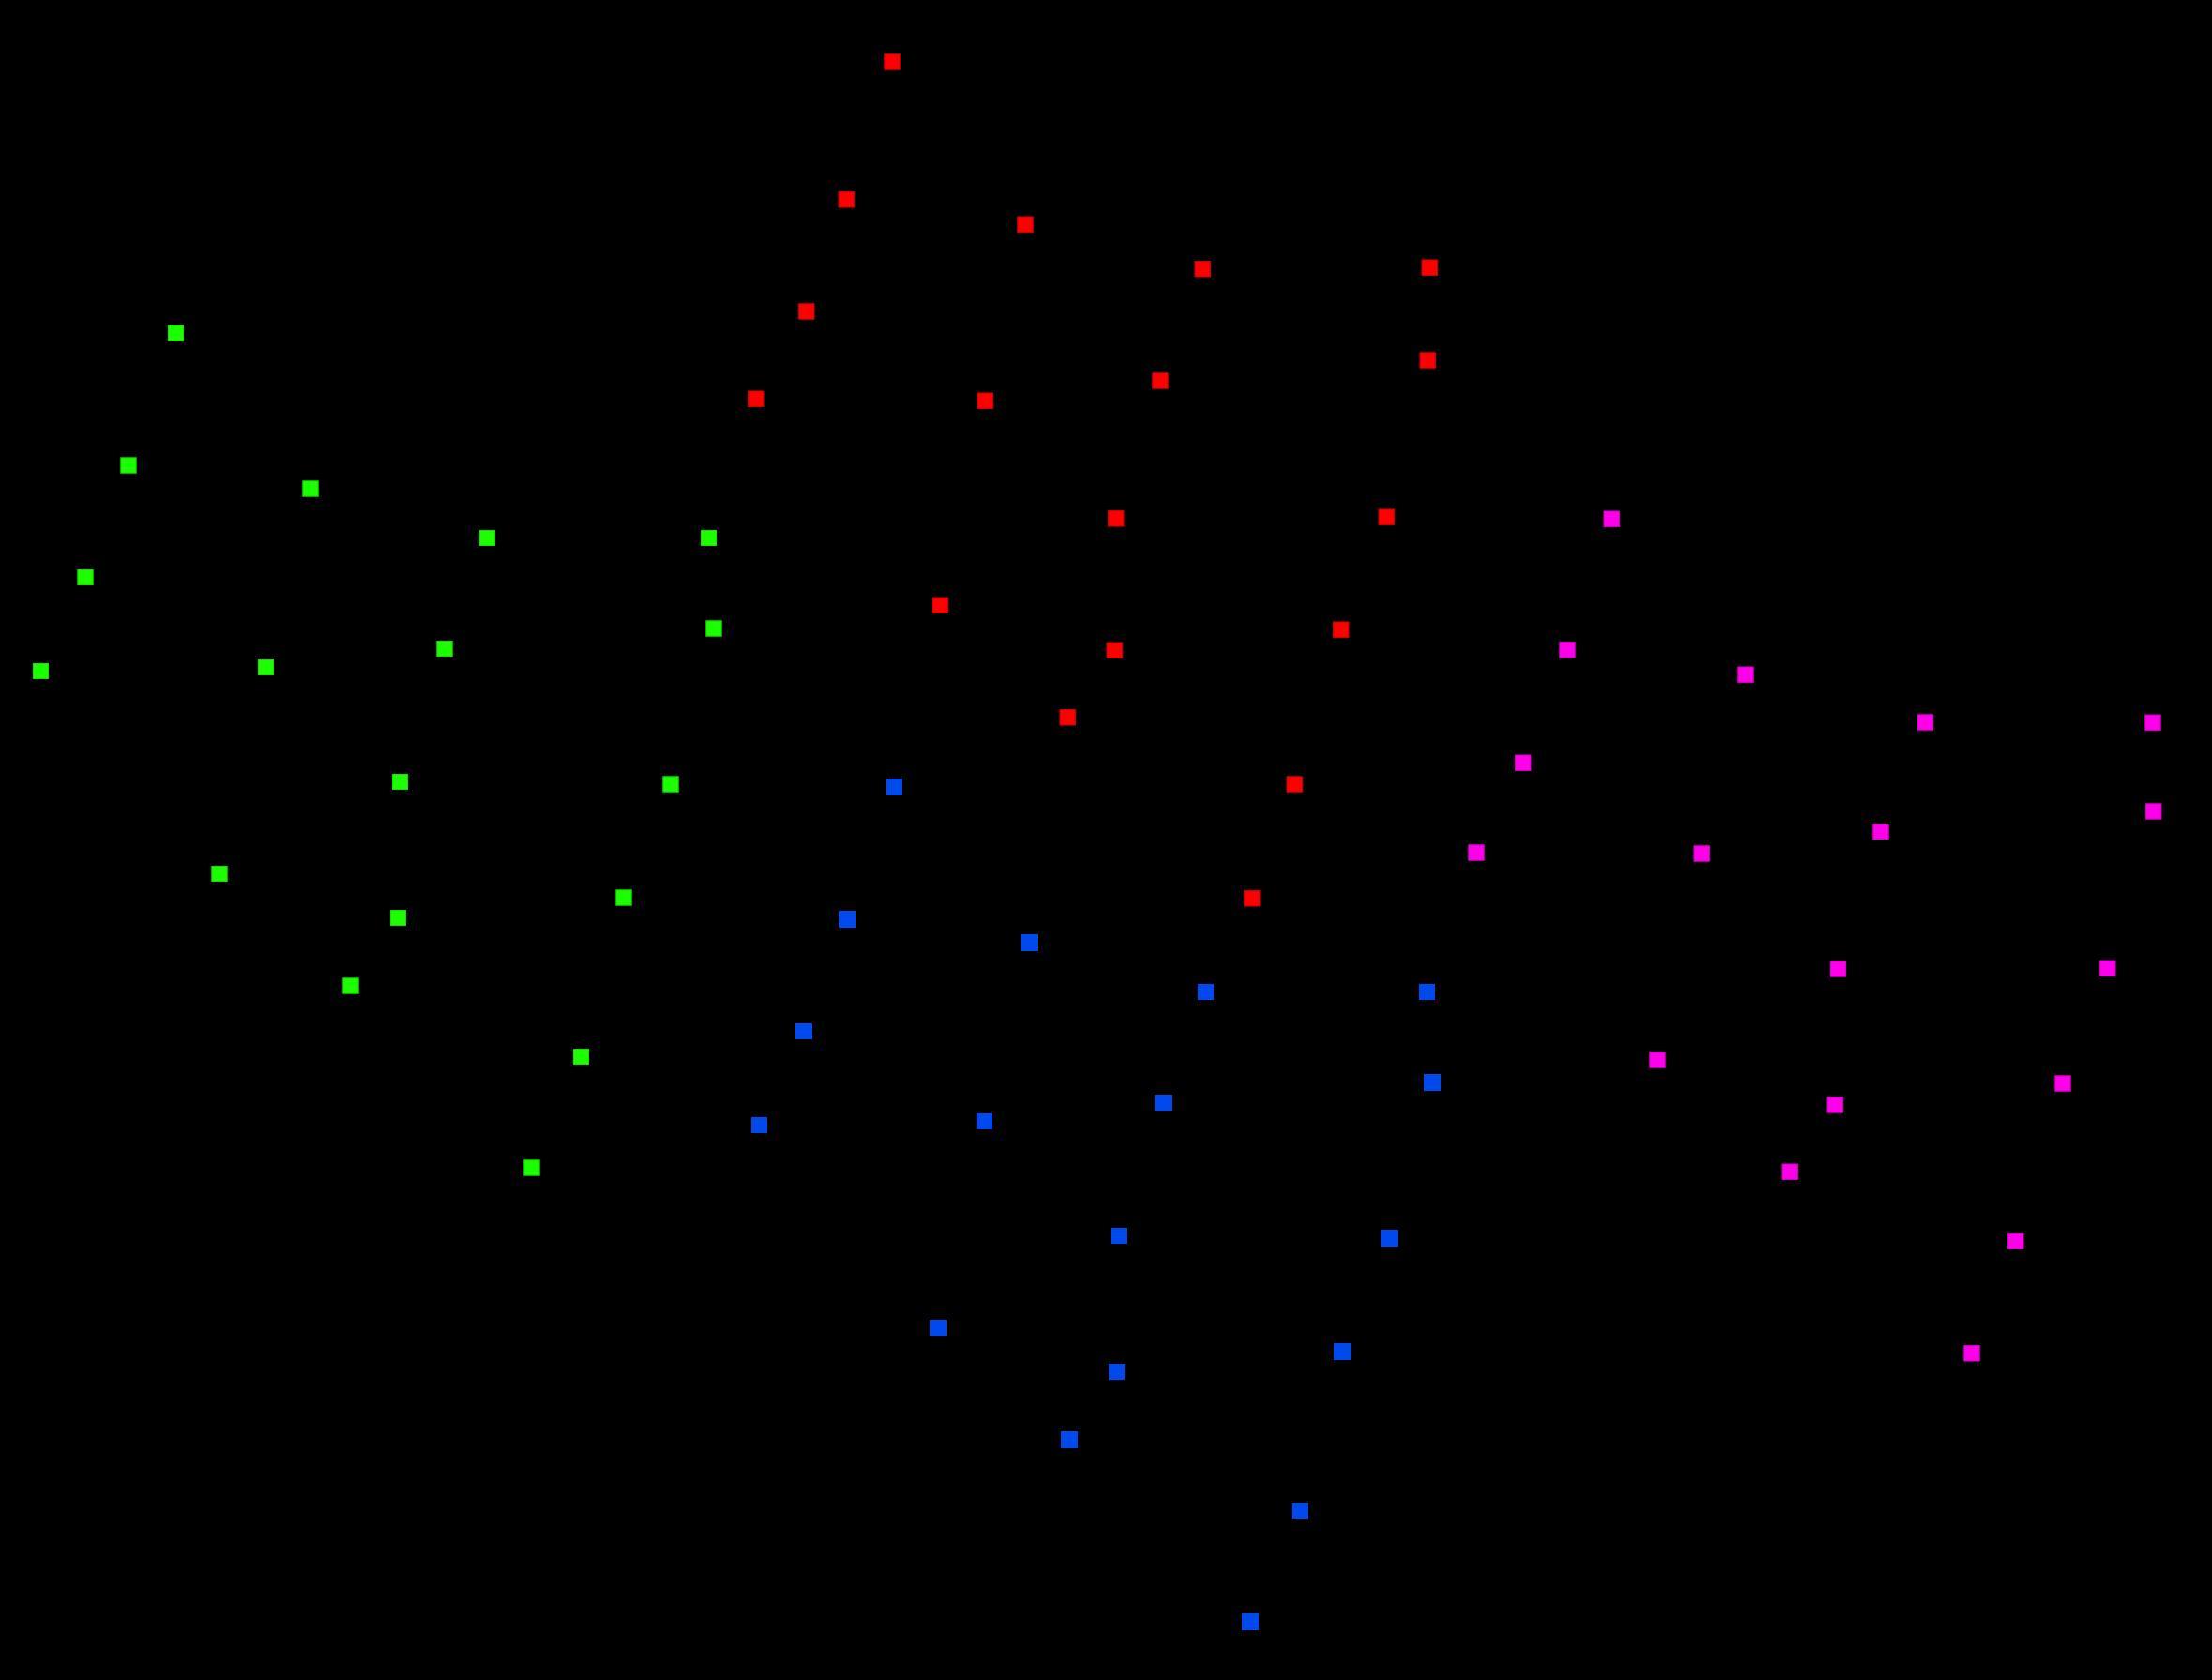 Four repetitions of the pattern in different colors